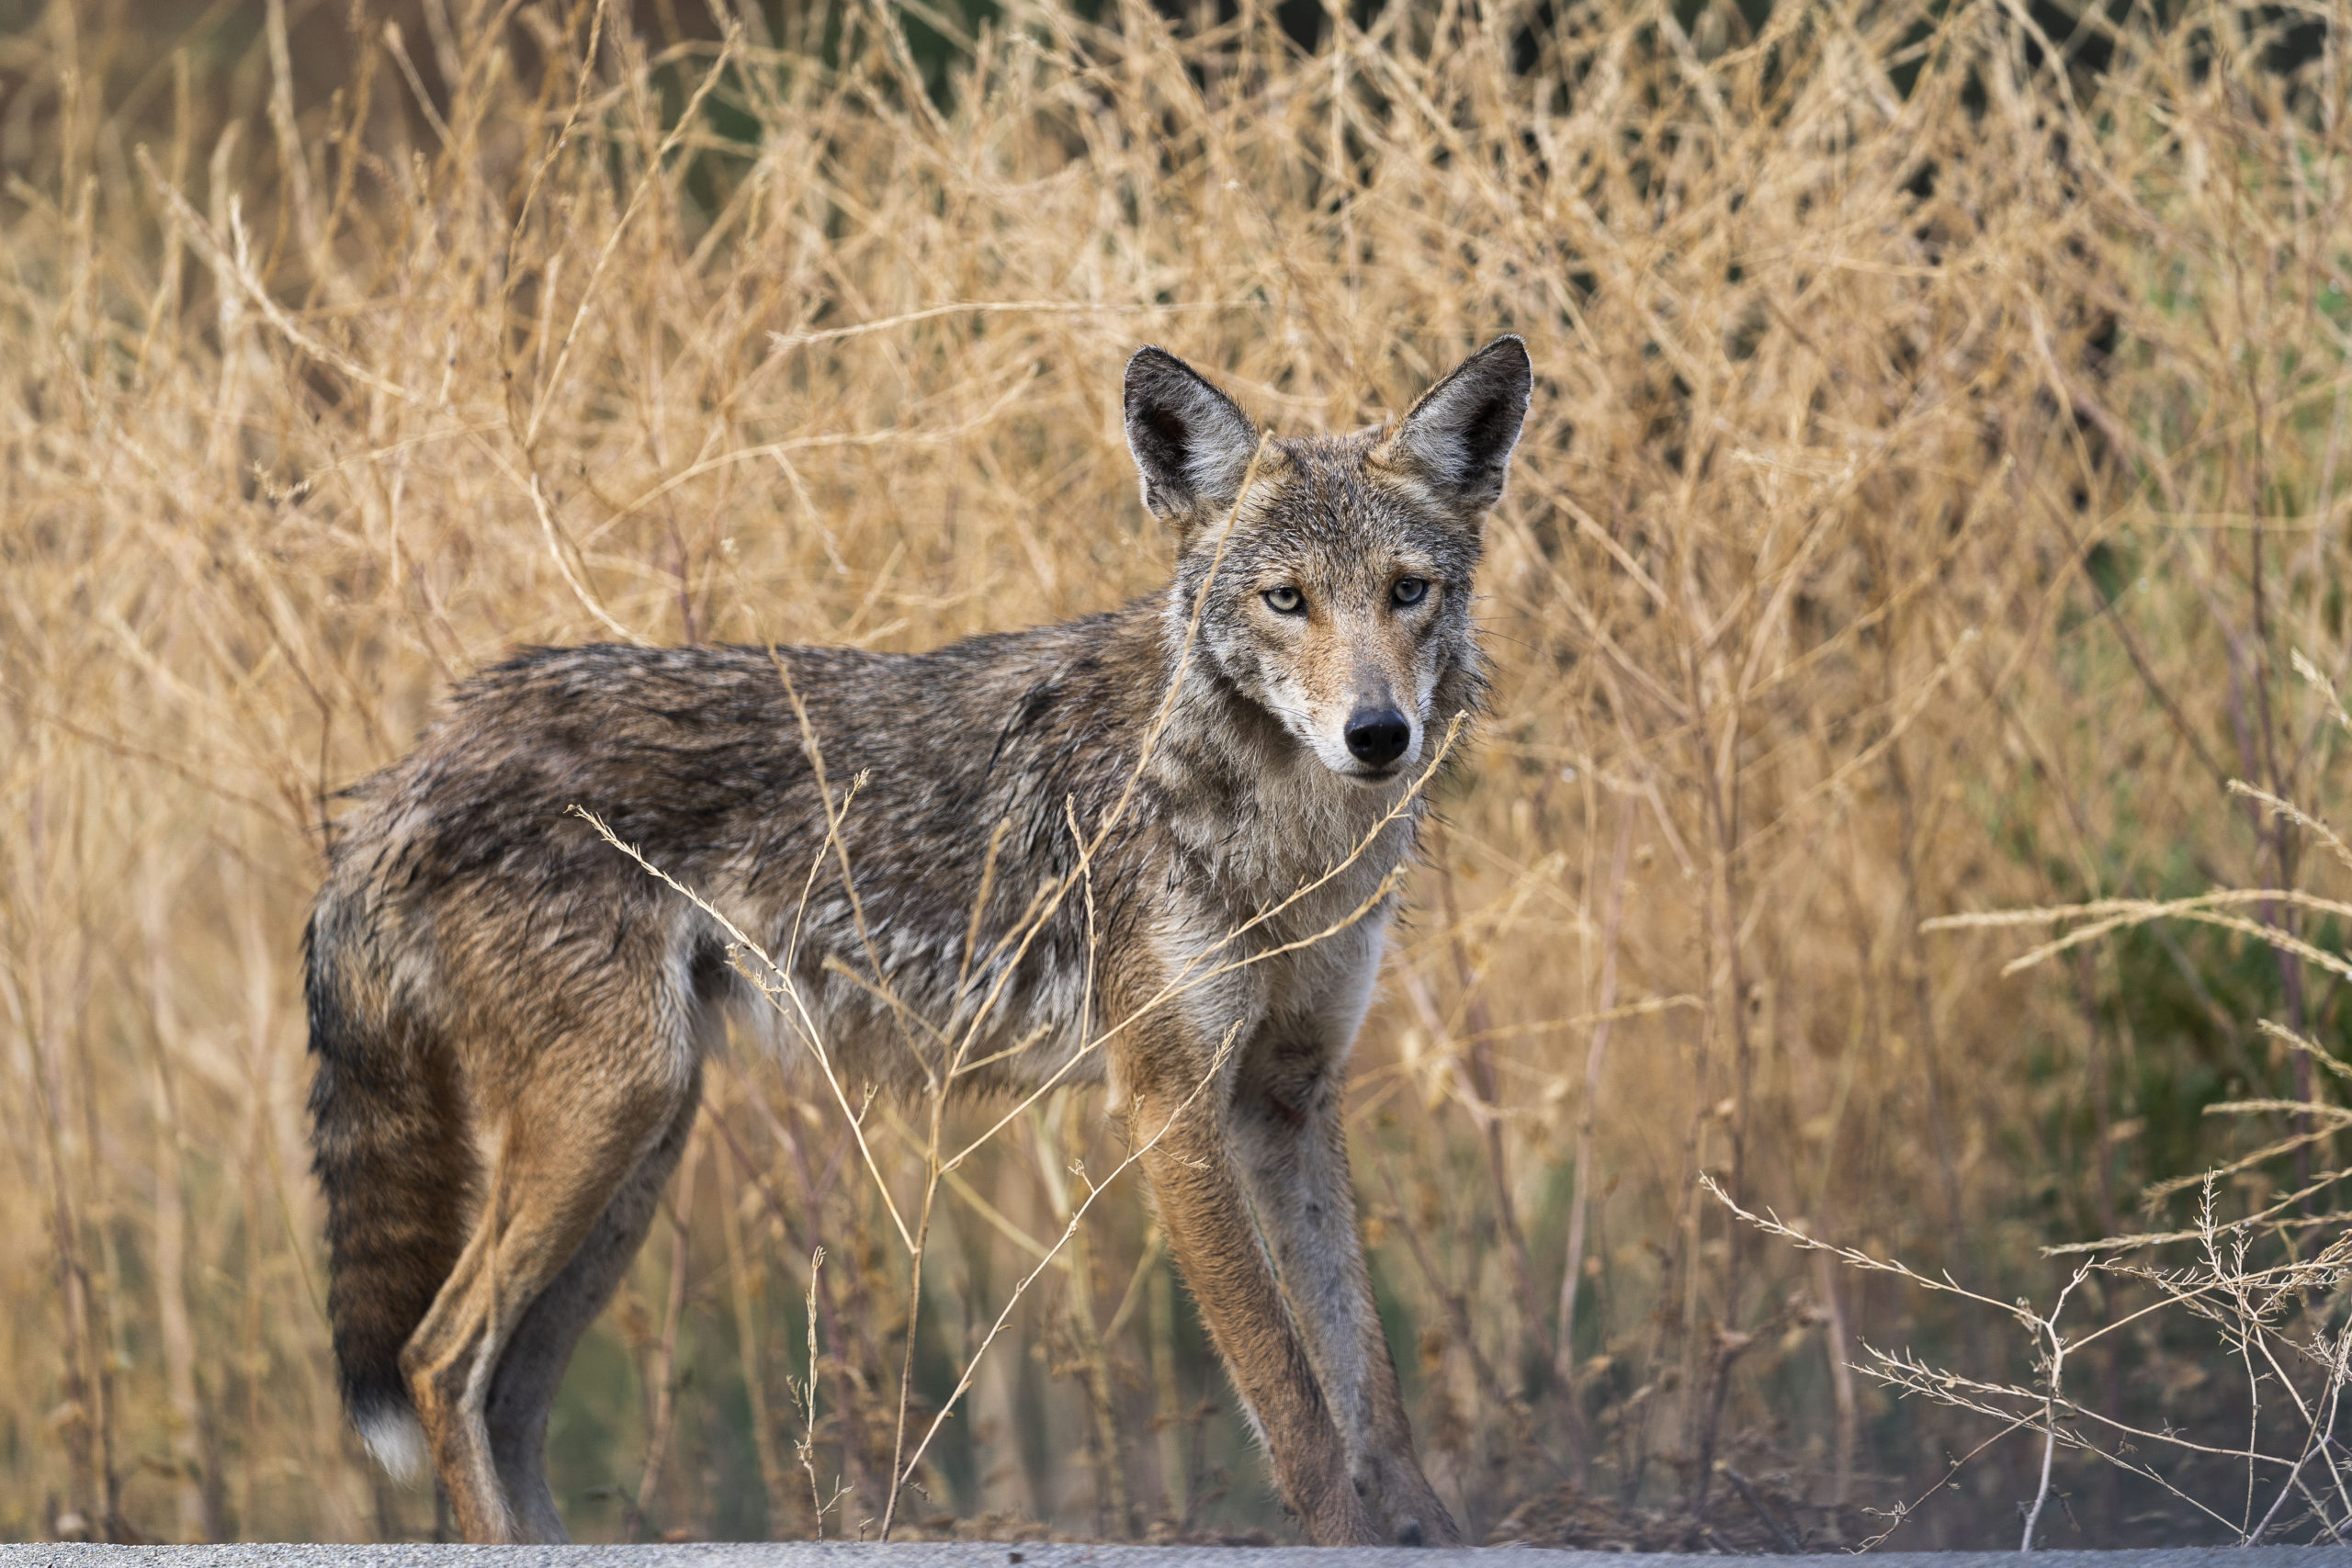 Coyotes thriving in big cities, suburbs